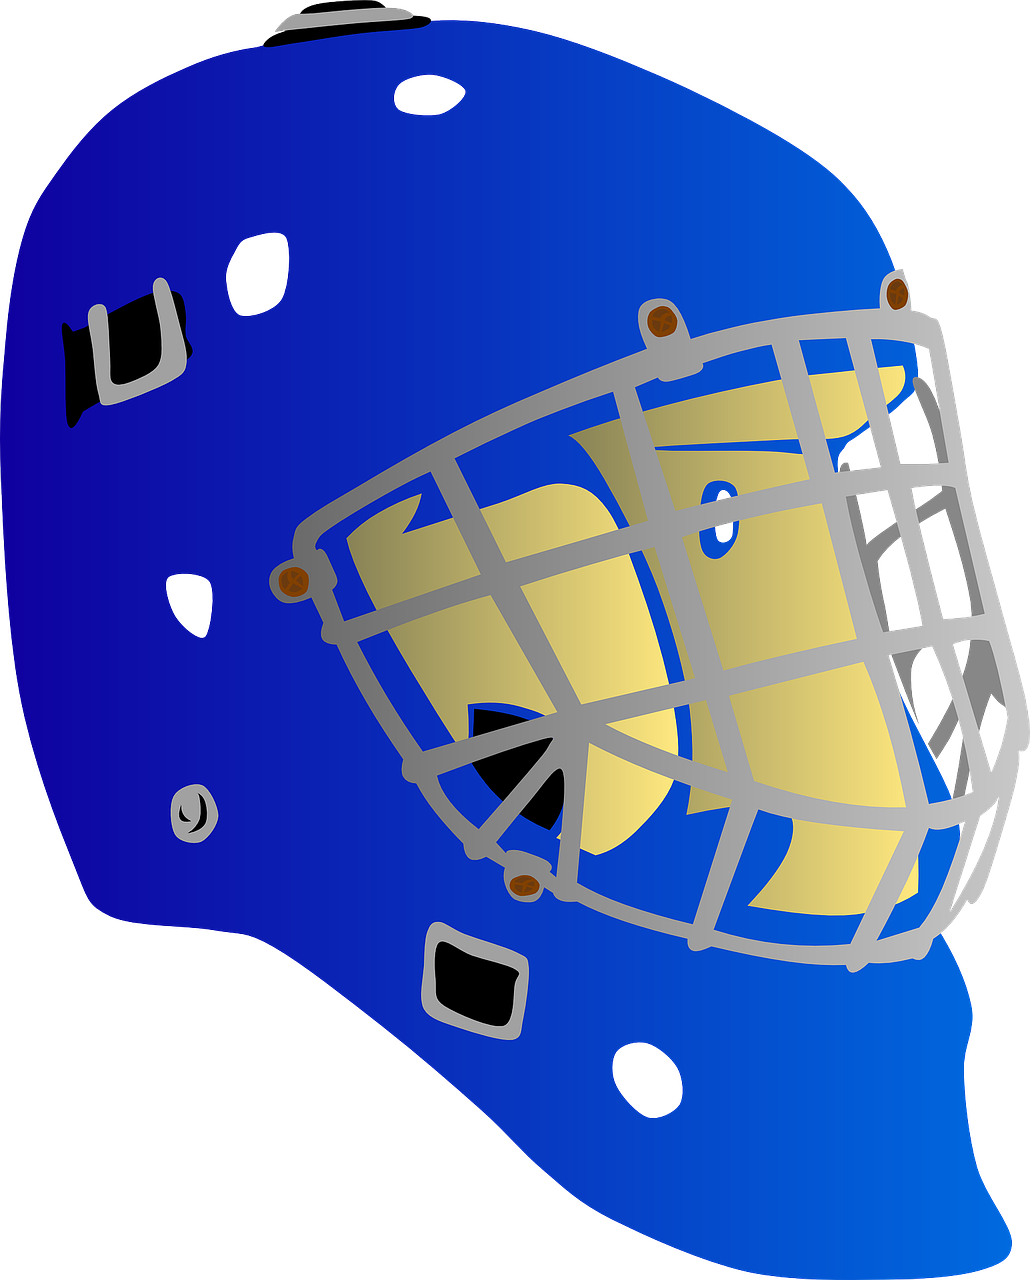 A Blue Helmet With A Yellow Face Mask